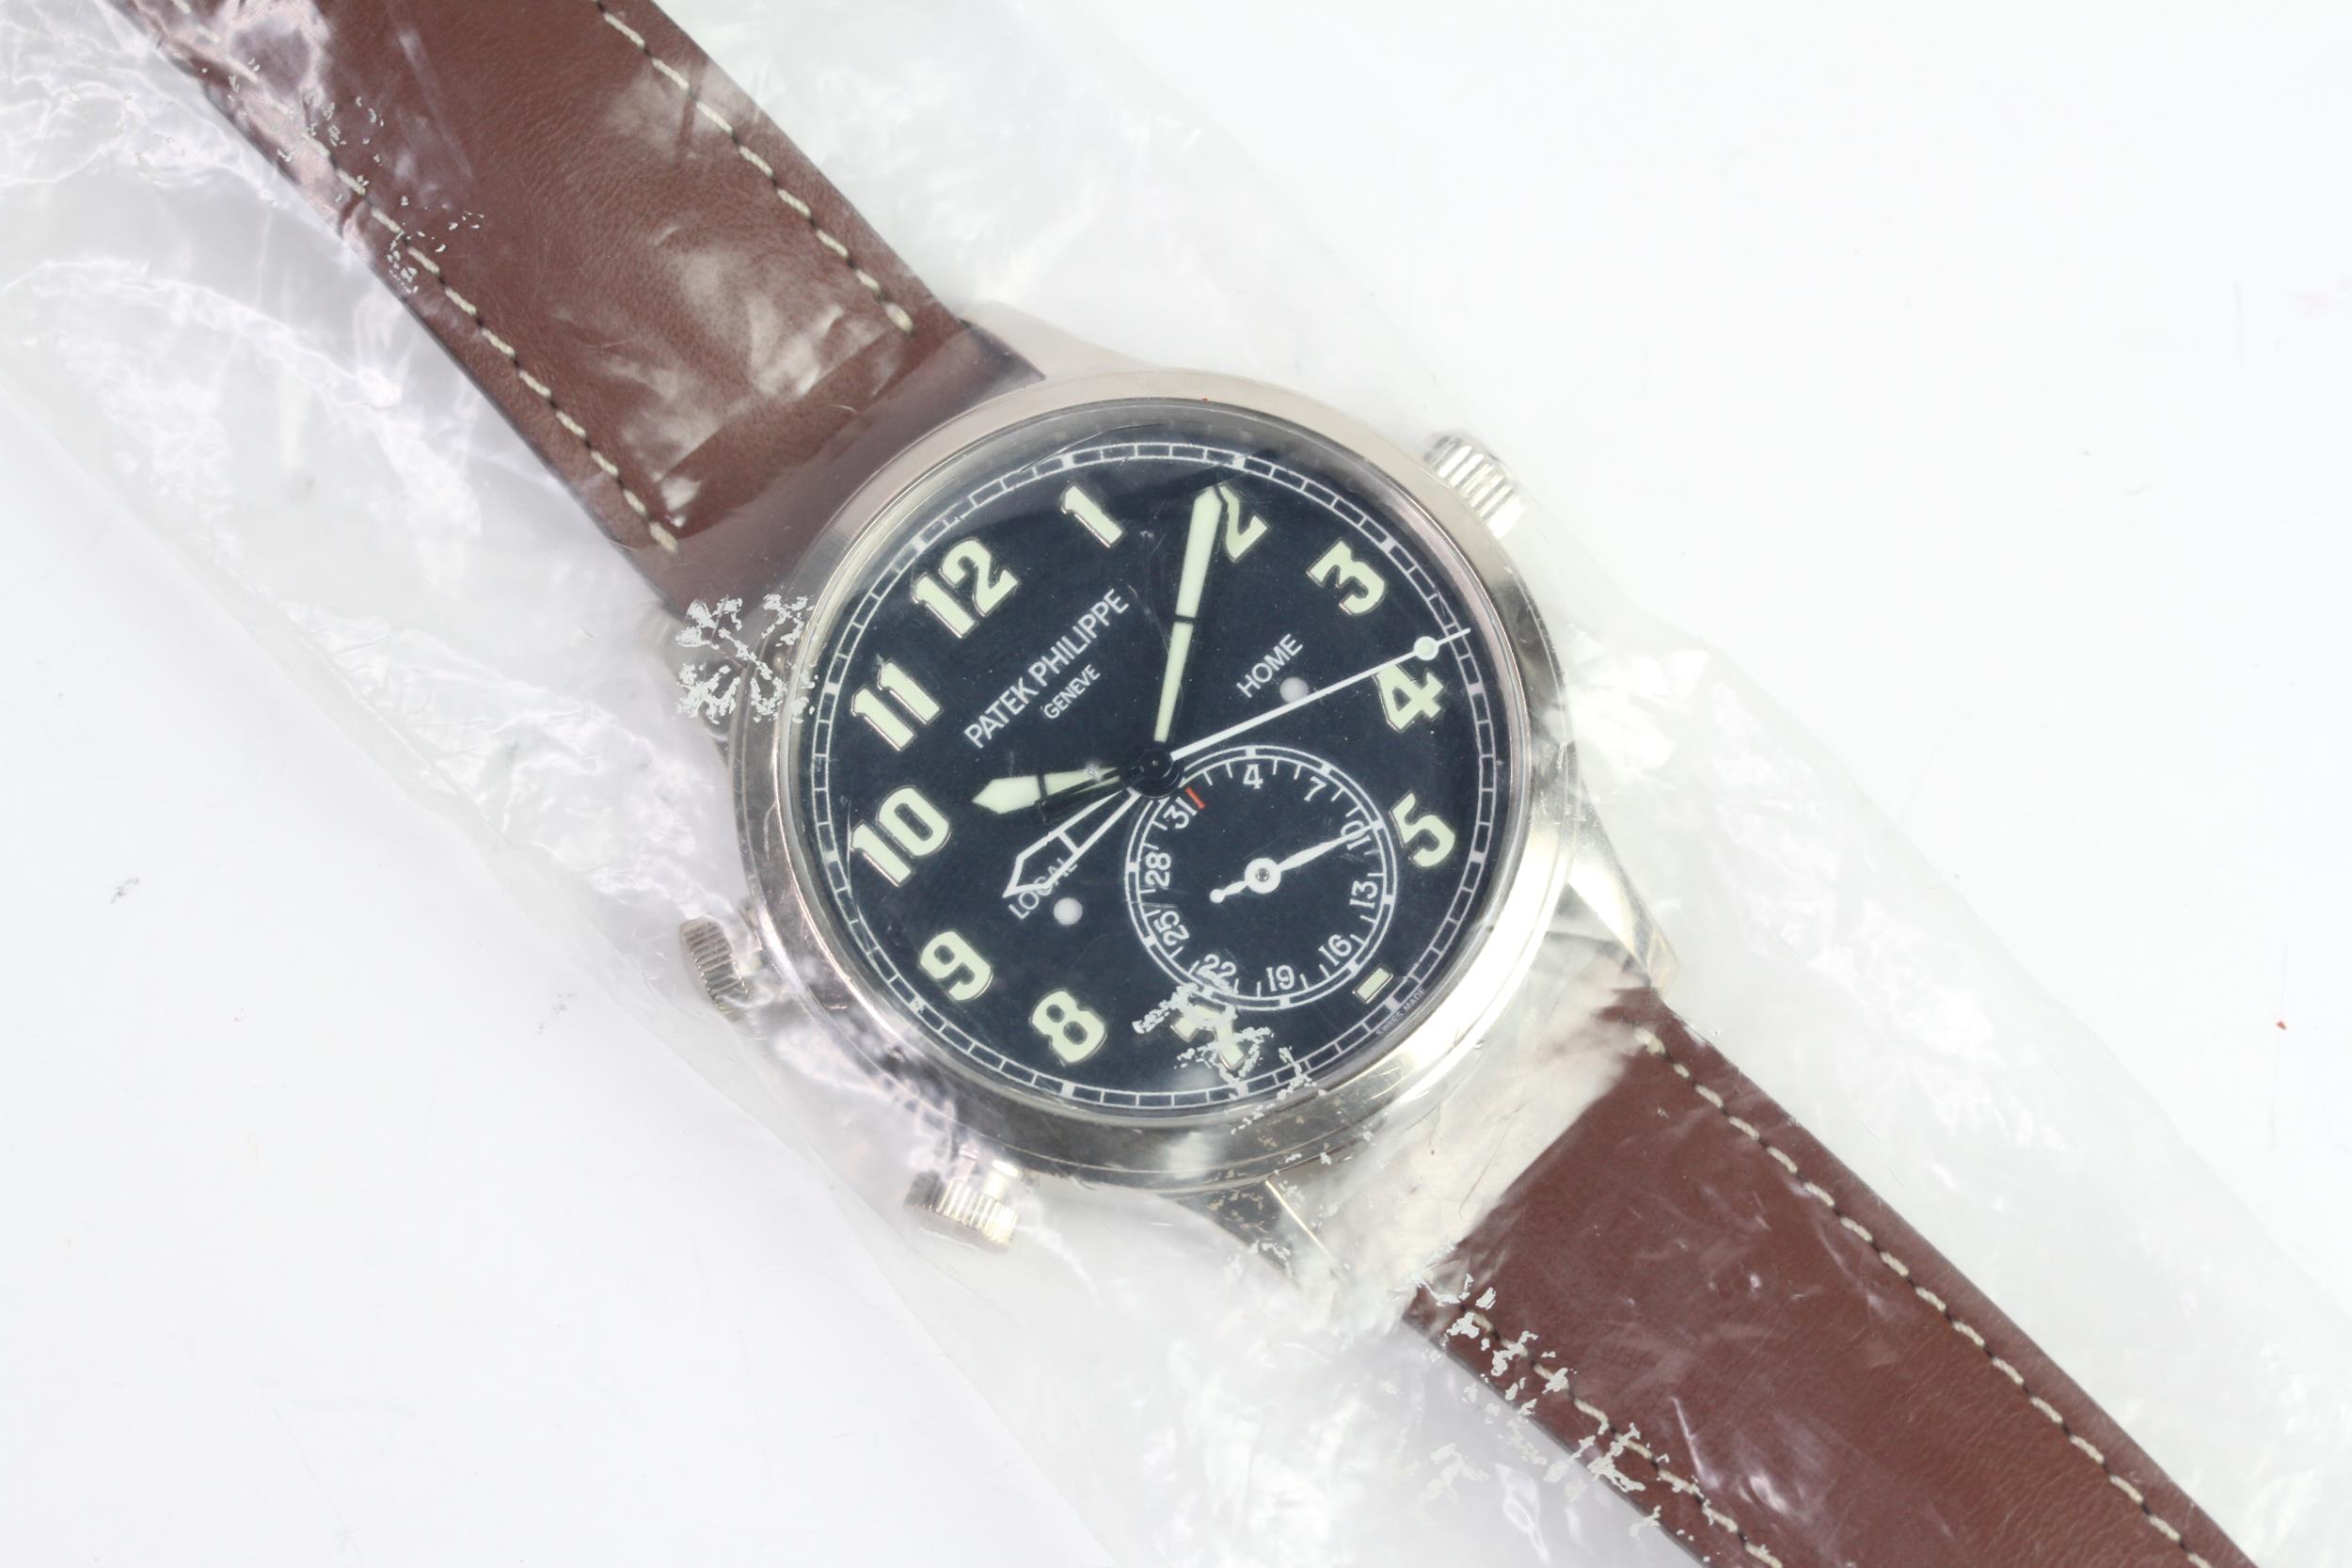 A FINE PATEK PHILIPPE CALATRAVA PILOT TRAVEL TIME REFERENCE 5224G-001, SEALED FROM SERVICE, WITH BOX - Image 6 of 19